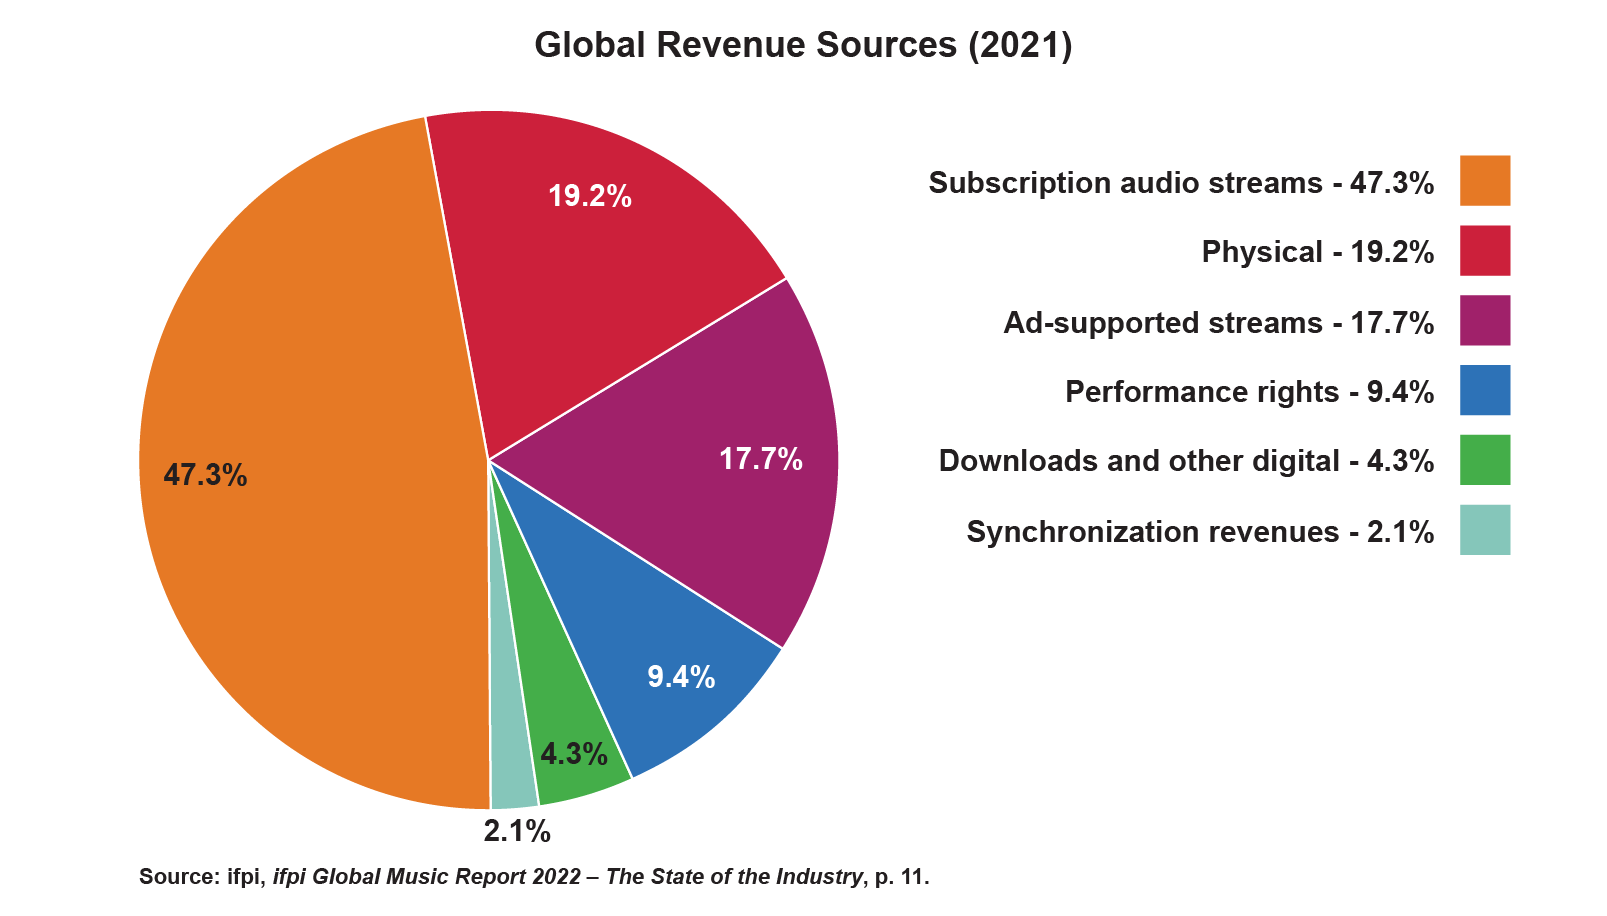 A pie chart depicting the global music industry revenue sources in 2021. The highest percentage is subscription audio streams at 47.3%, followed by physical at 19.2%, ad-supported streams at 17.7%, performance rights at 9.4%, downloads and other digital at 4.3%, and synchronization revenues at 2.1%.